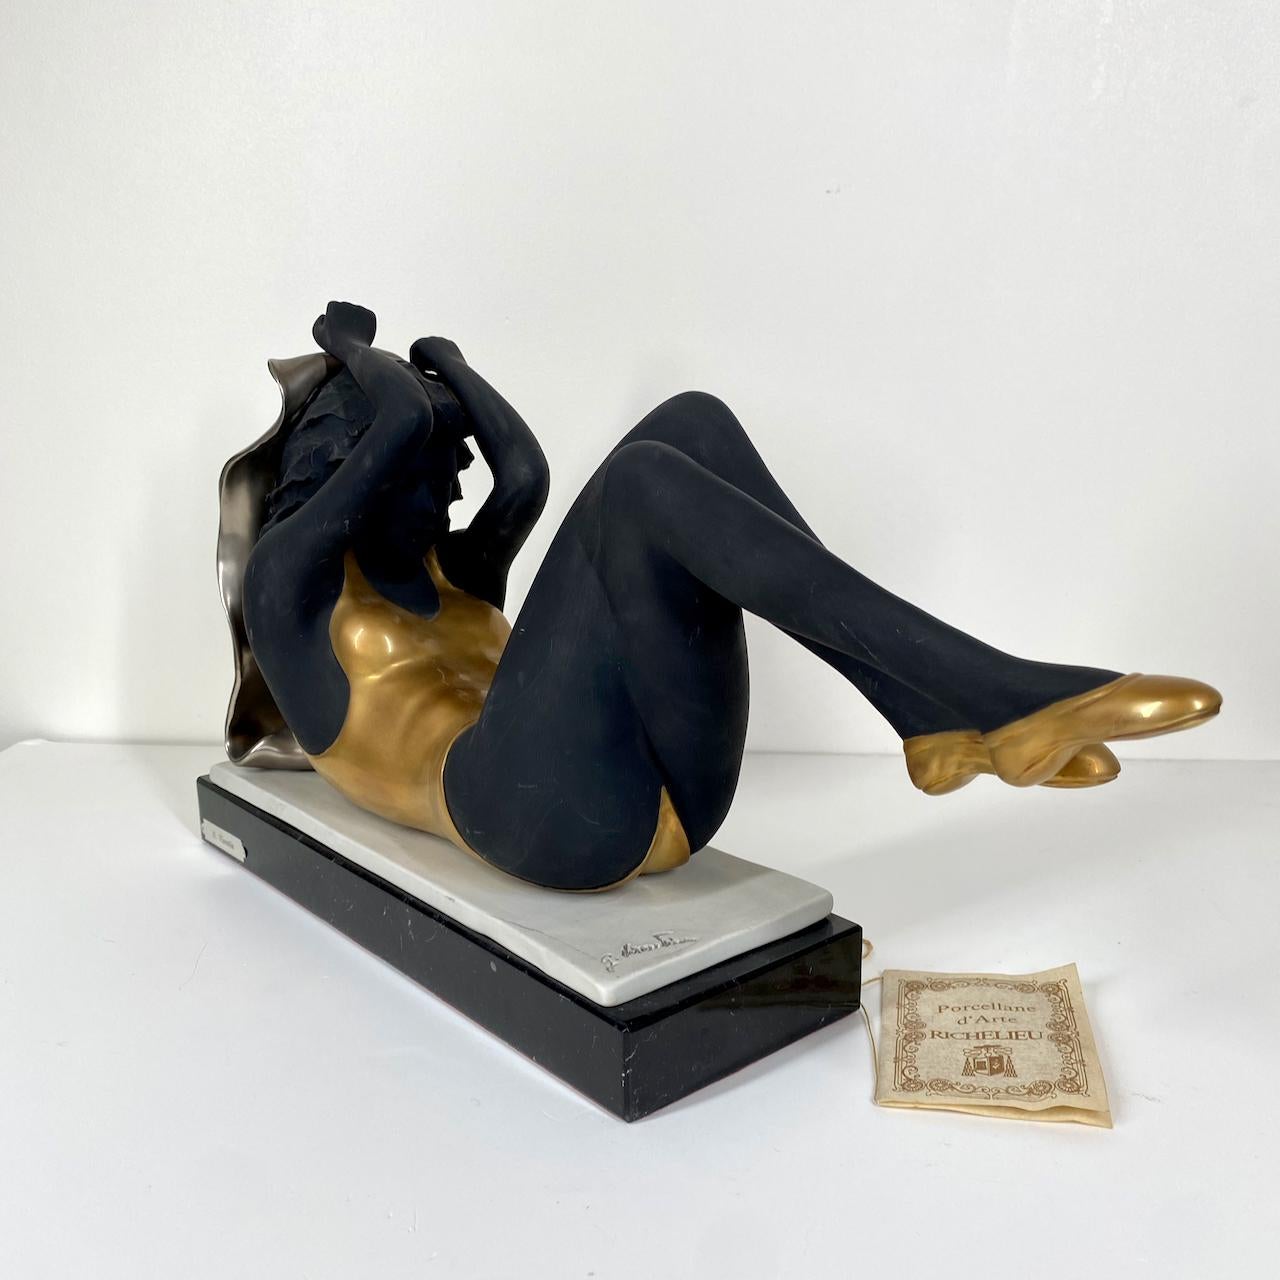 RESTING DANCER VISENTIN G - PORCELLANE D'ARTE RICHELIEU

Resting dancer statue with 18th Carat gold leaf
Original certificate still attached with the wax seal
and it is signed by the designer Gianni Visentin (1938-2010).

Limited edition of 500